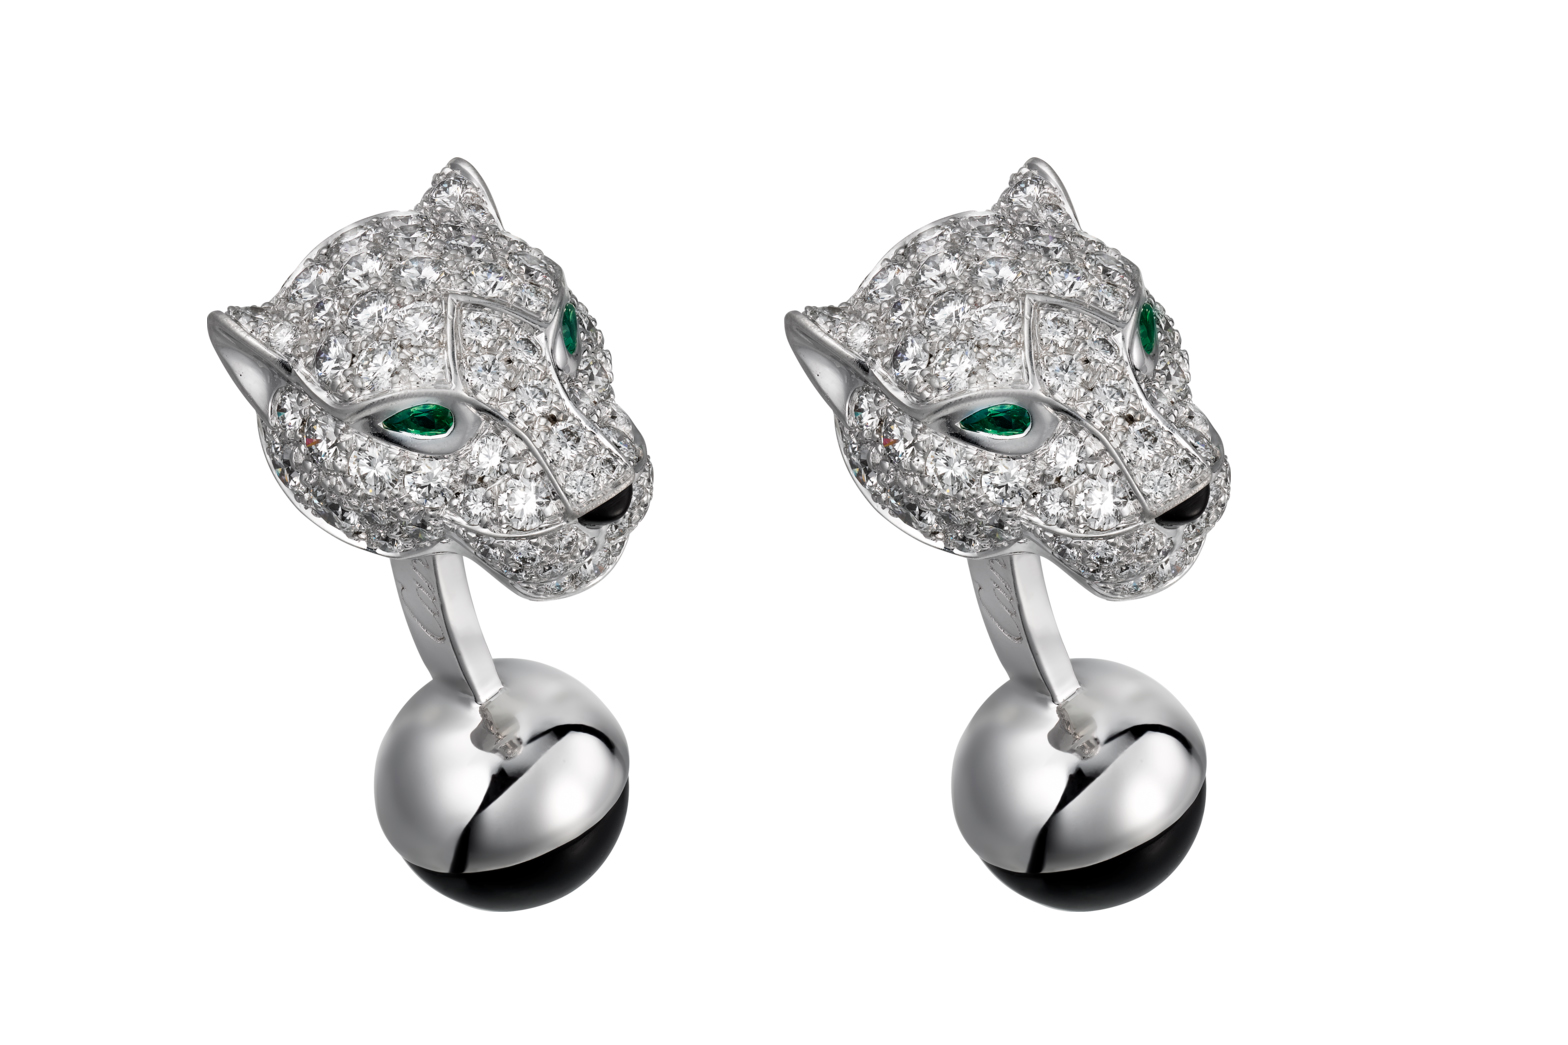 Cufflinks: Must-have jewellery for every man